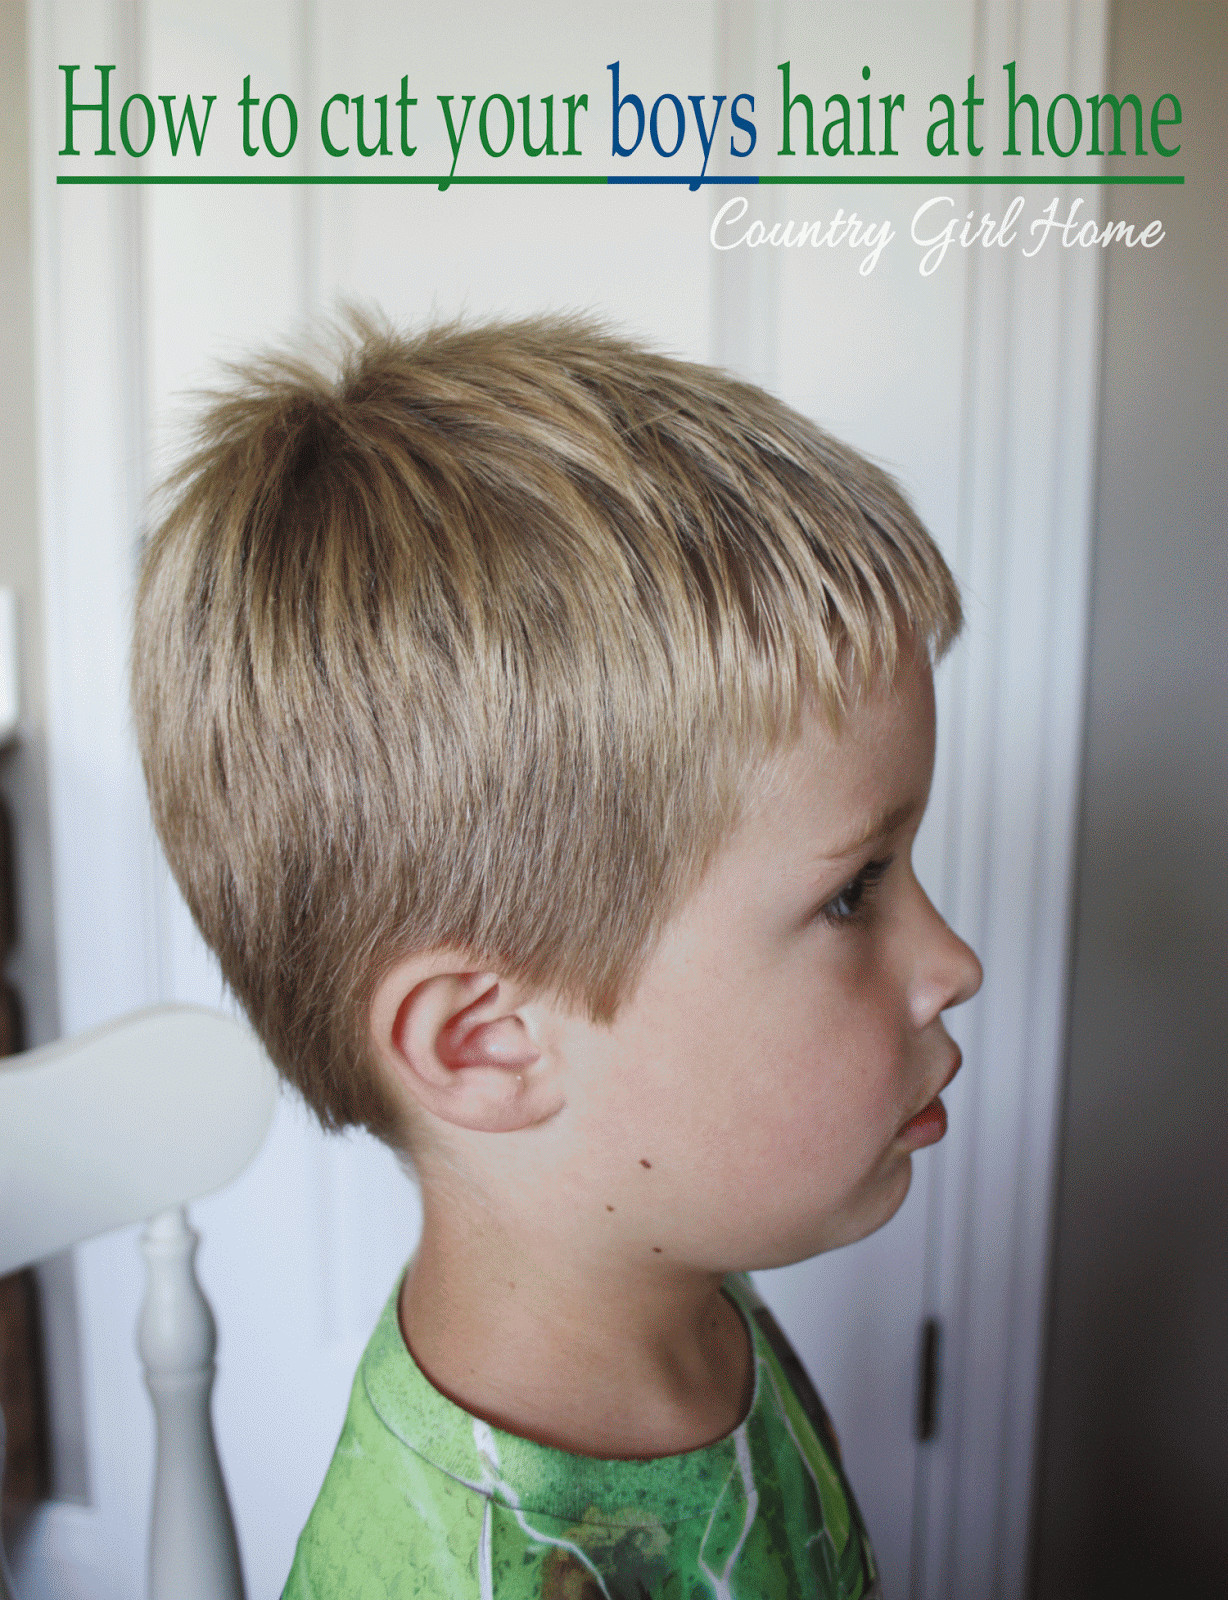 How To Cut A Boys Hair
 COUNTRY GIRL HOME How to cut your boys hair at home for